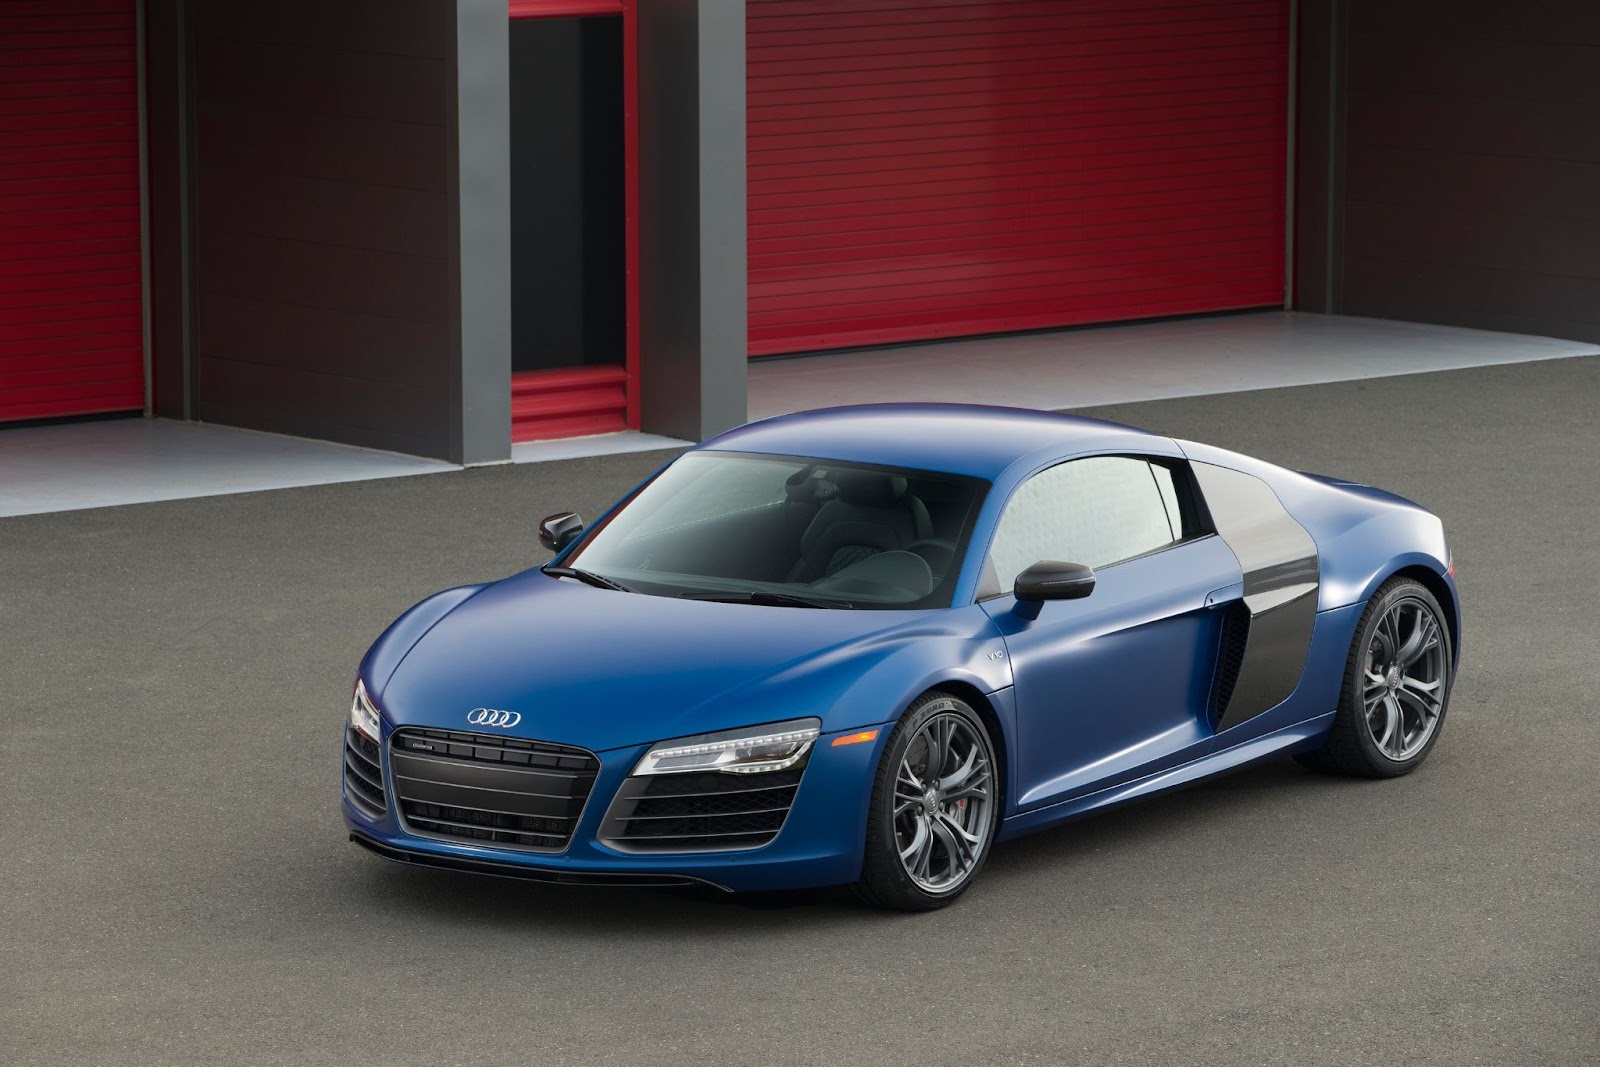 A blue Audi R8 shot from above